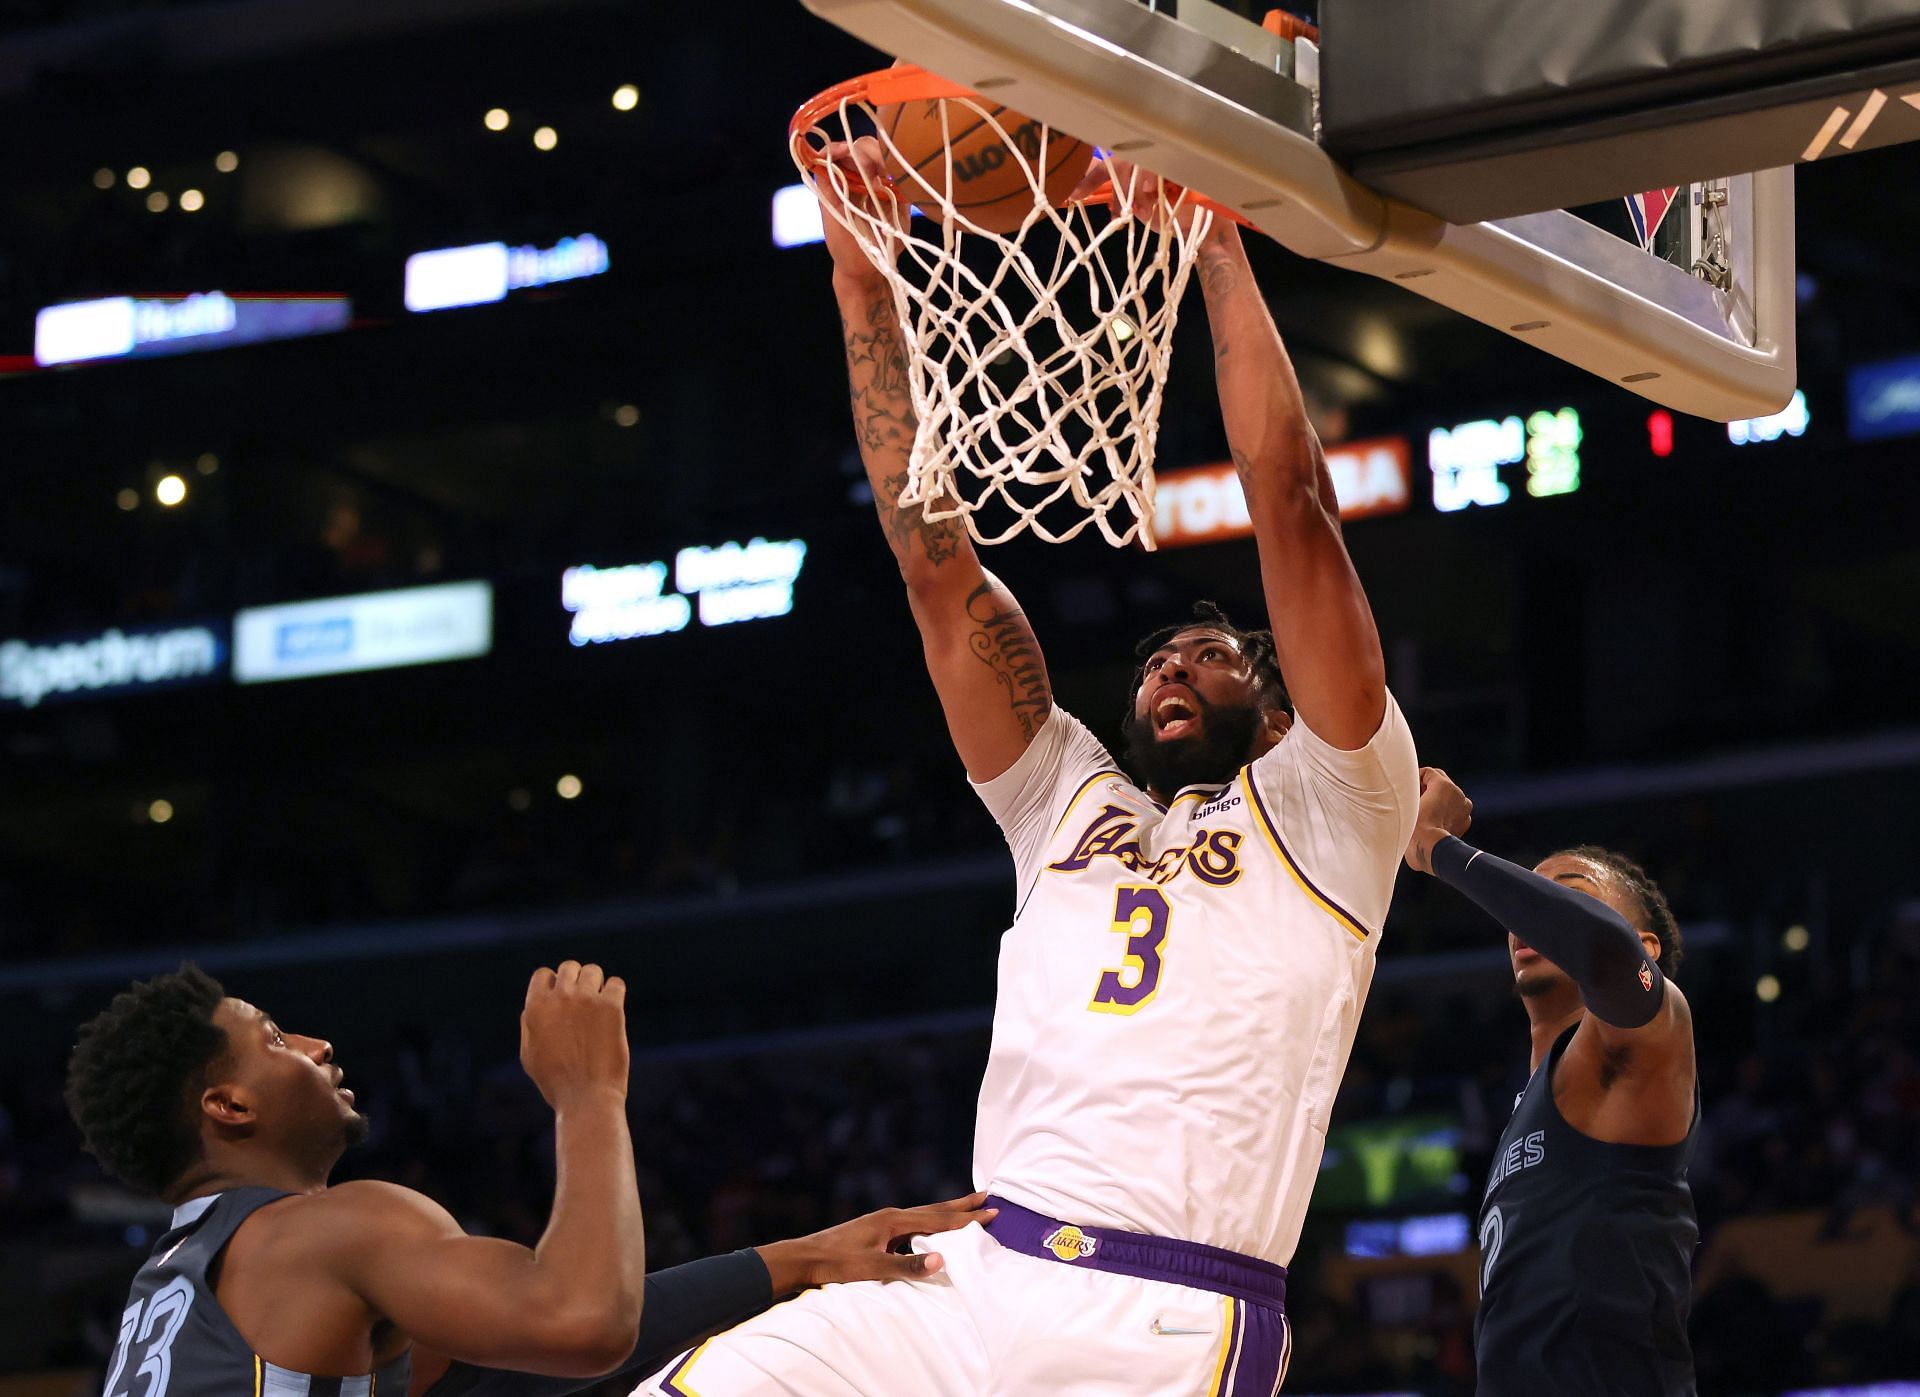 The LA Lakers would benefit immensely from Anthony Davis having a career year